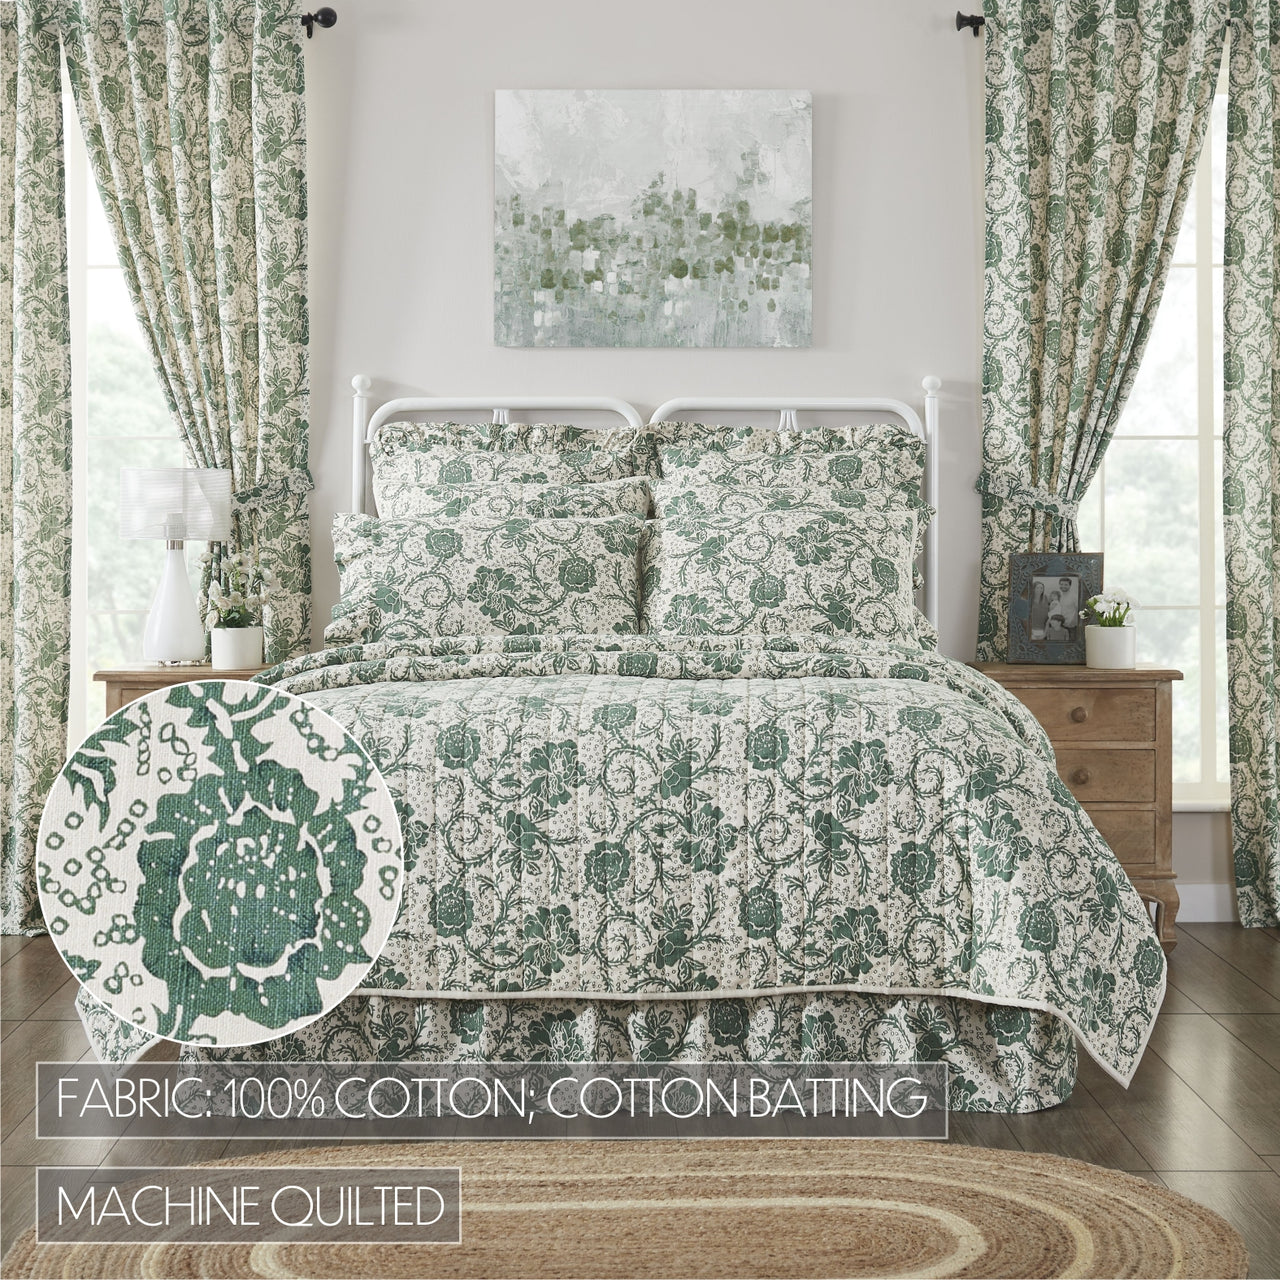 Dorset Green Floral Luxury King Quilt 120WX105L VHC Brands